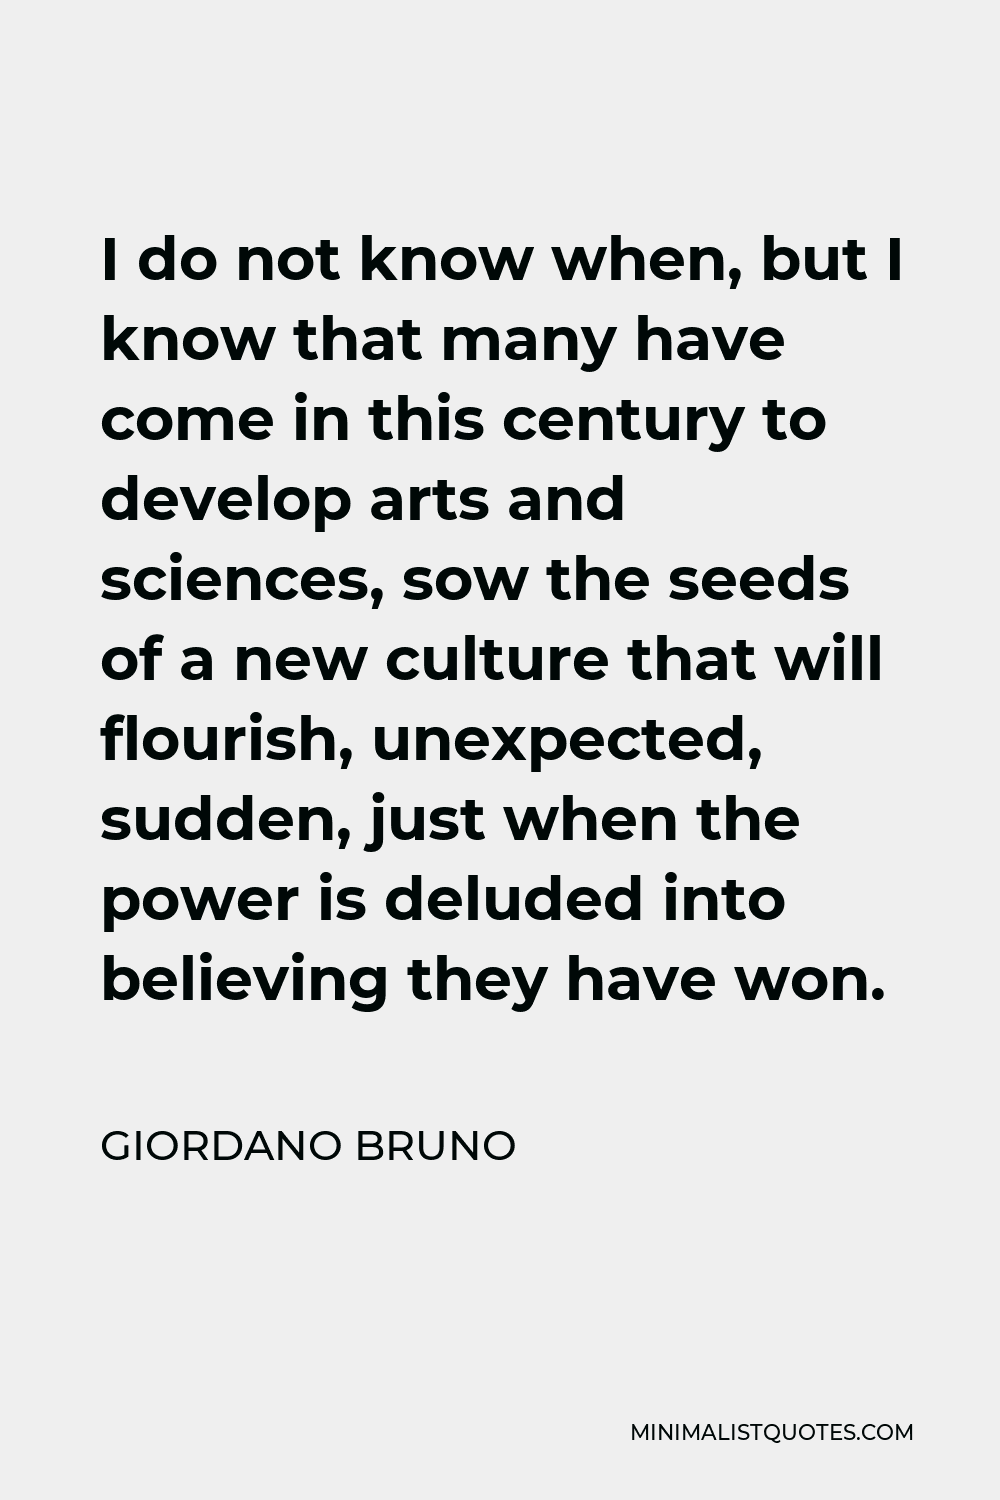 Giordano Bruno Quote - I do not know when, but I know that many have come in this century to develop arts and sciences, sow the seeds of a new culture that will flourish, unexpected, sudden, just when the power is deluded into believing they have won.